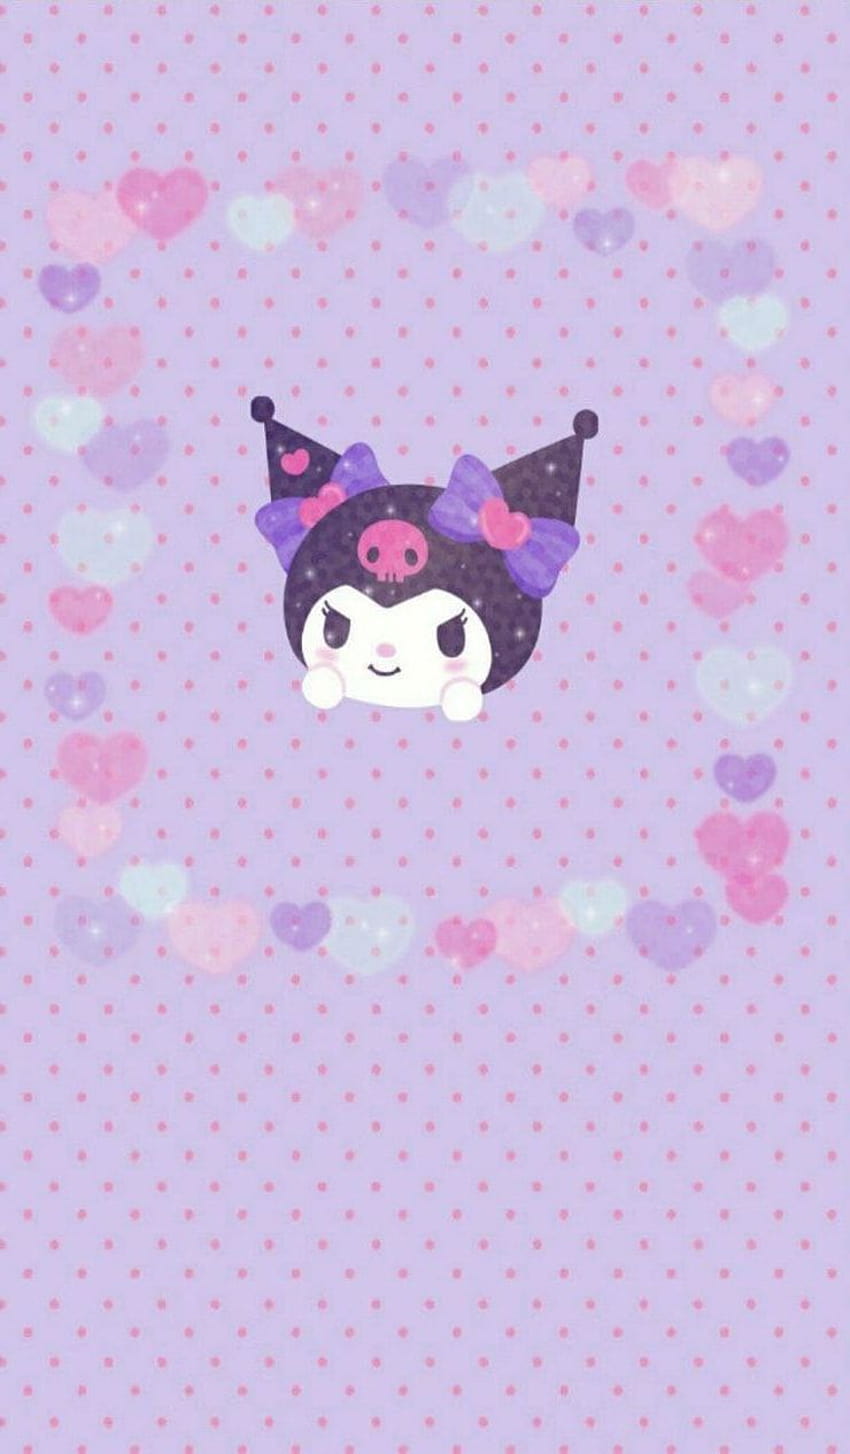 A cute cat with hearts and bows on it - Kuromi